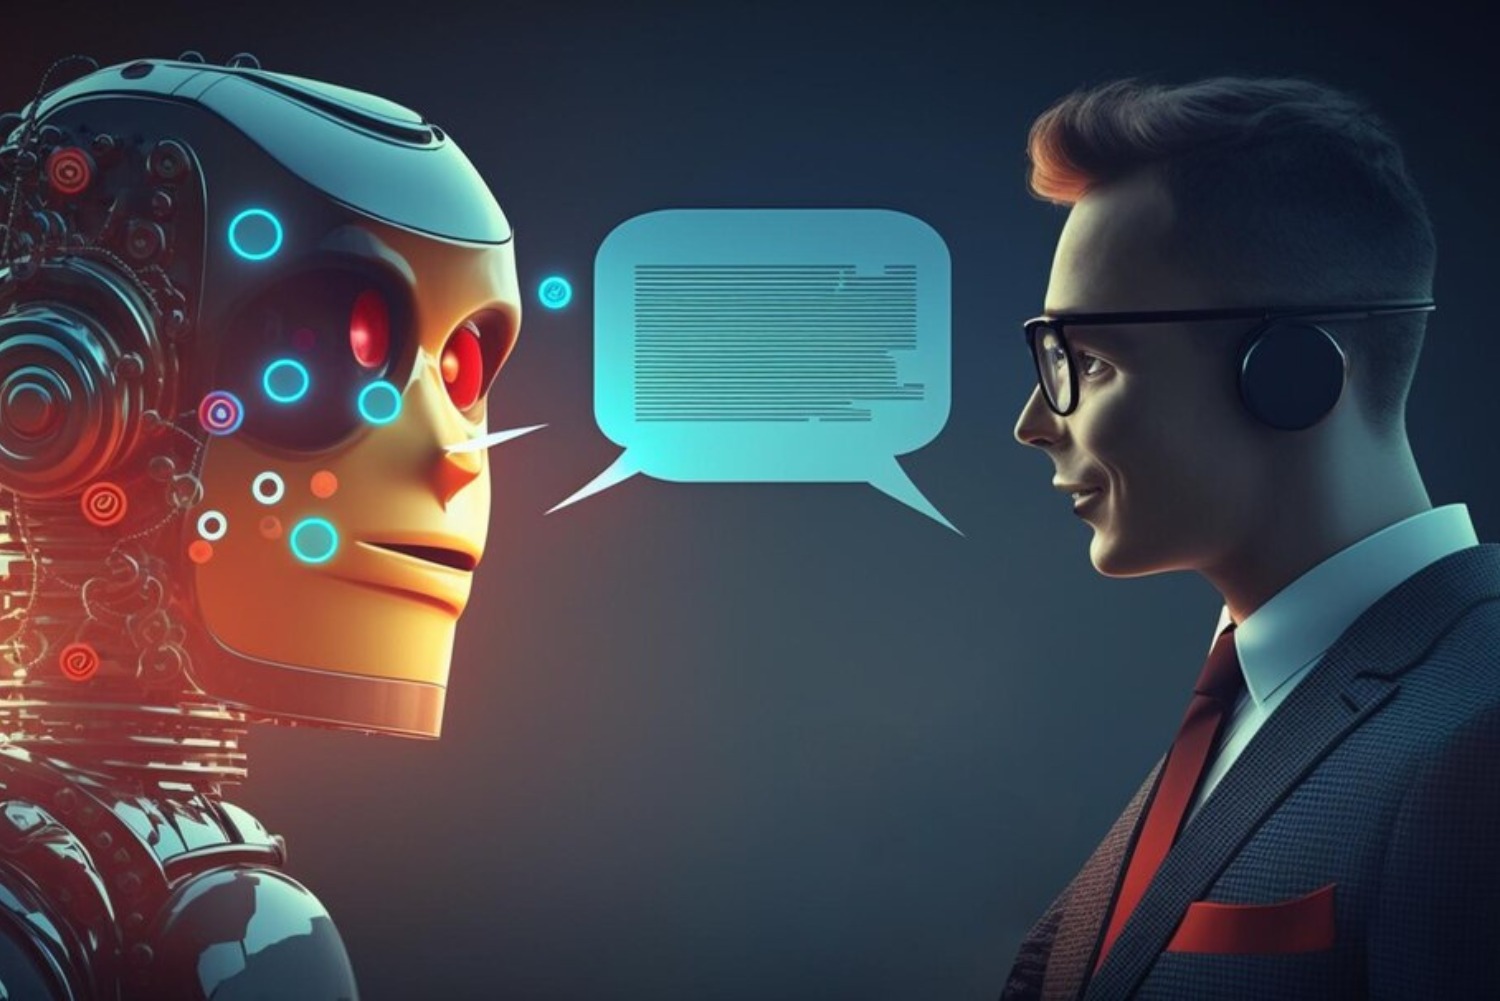 Conversational AI: The Next Frontier for Mobile Personalization